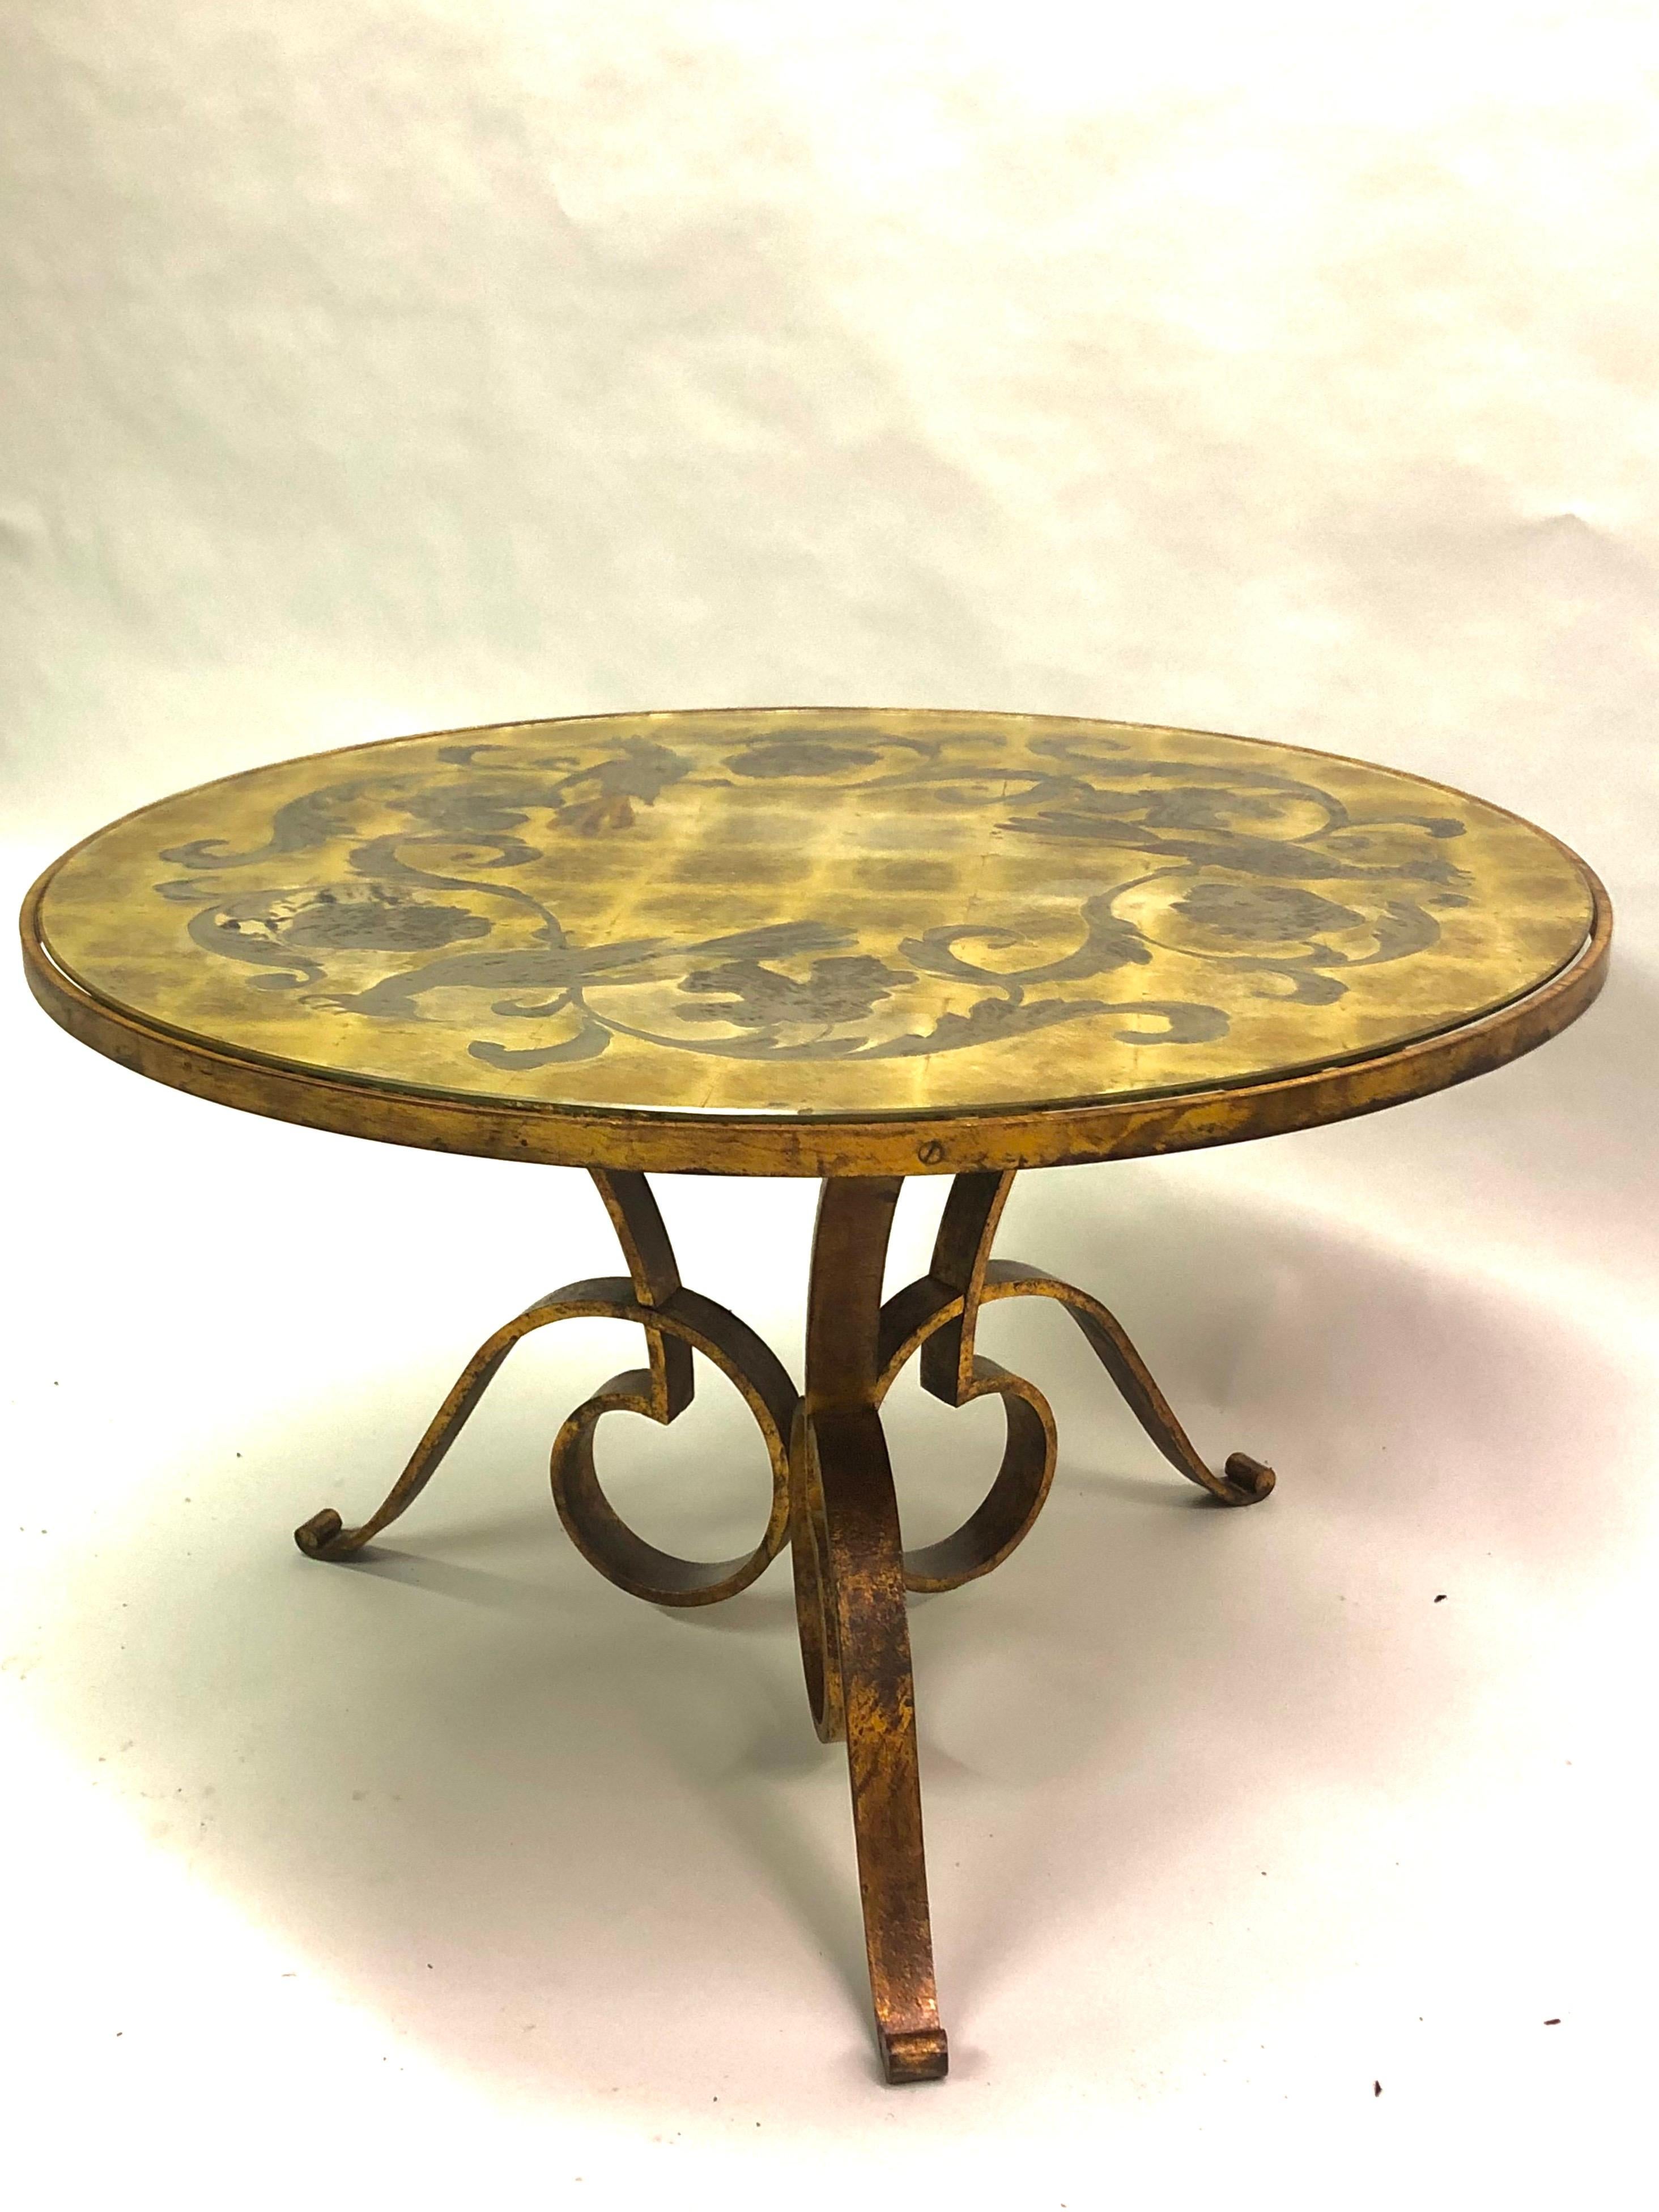 French Mid-Century Modern neoclassical gilt wrought iron round cocktail table or side / end table by Rene Drouet with a top of Verre Eglomisse (reverse painted glass). The poetic tripod form base is in gilt hand hammered iron and features 3 delicate